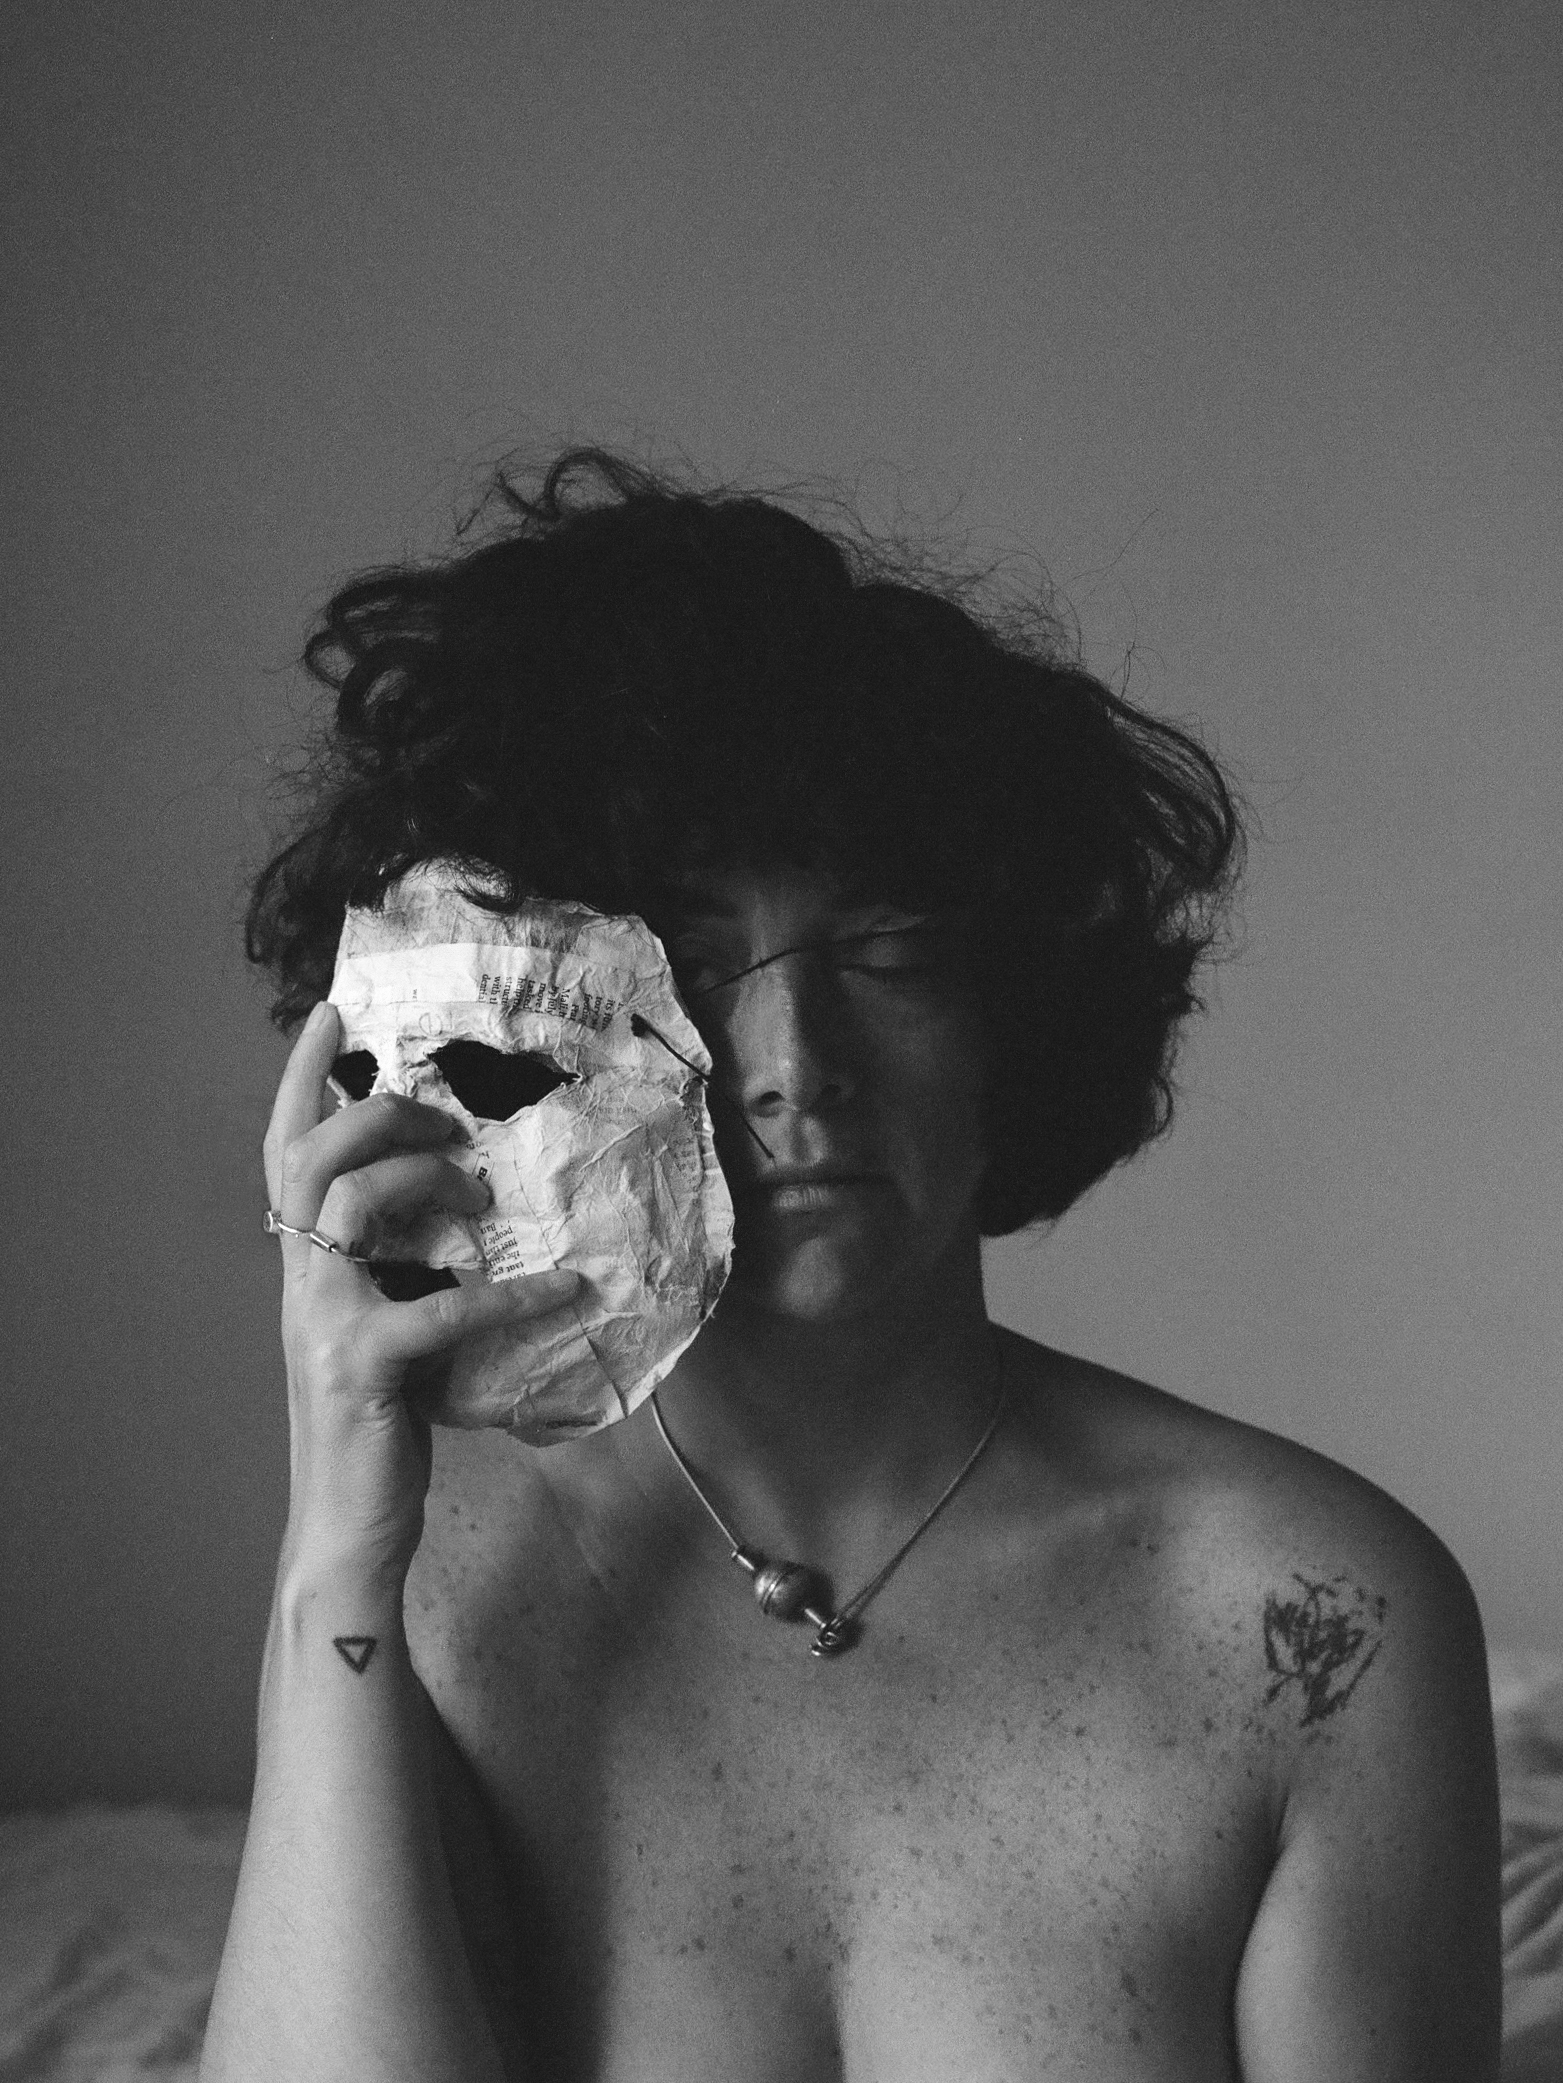 A person with short curly hair holds a papier mache mask next to their face